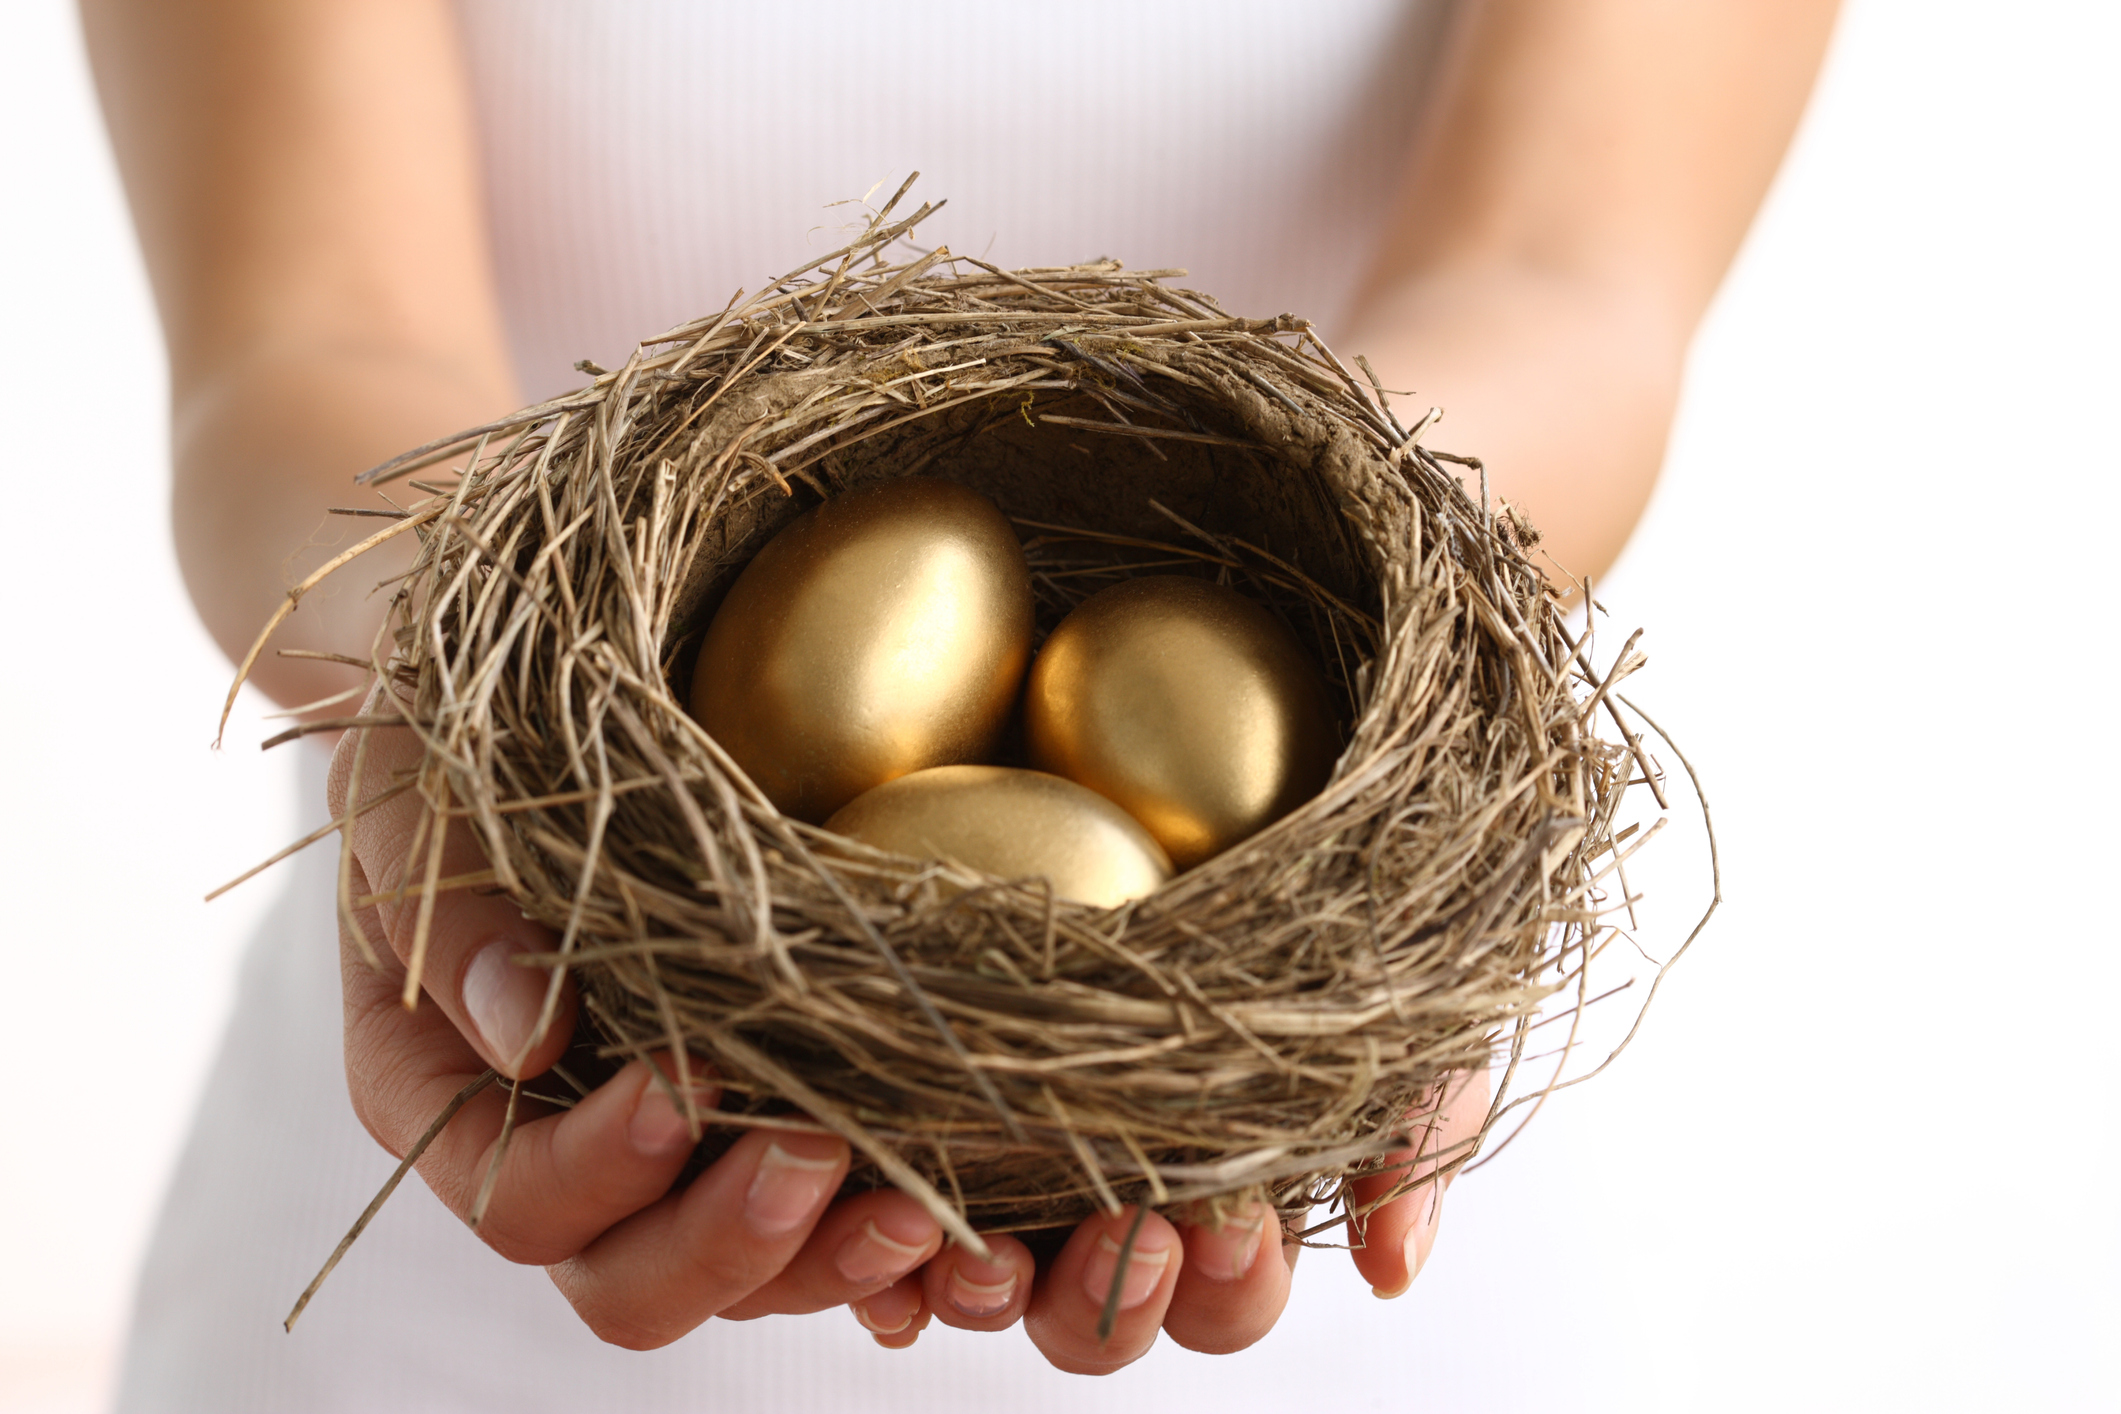 Hands holding nest with golden eggs